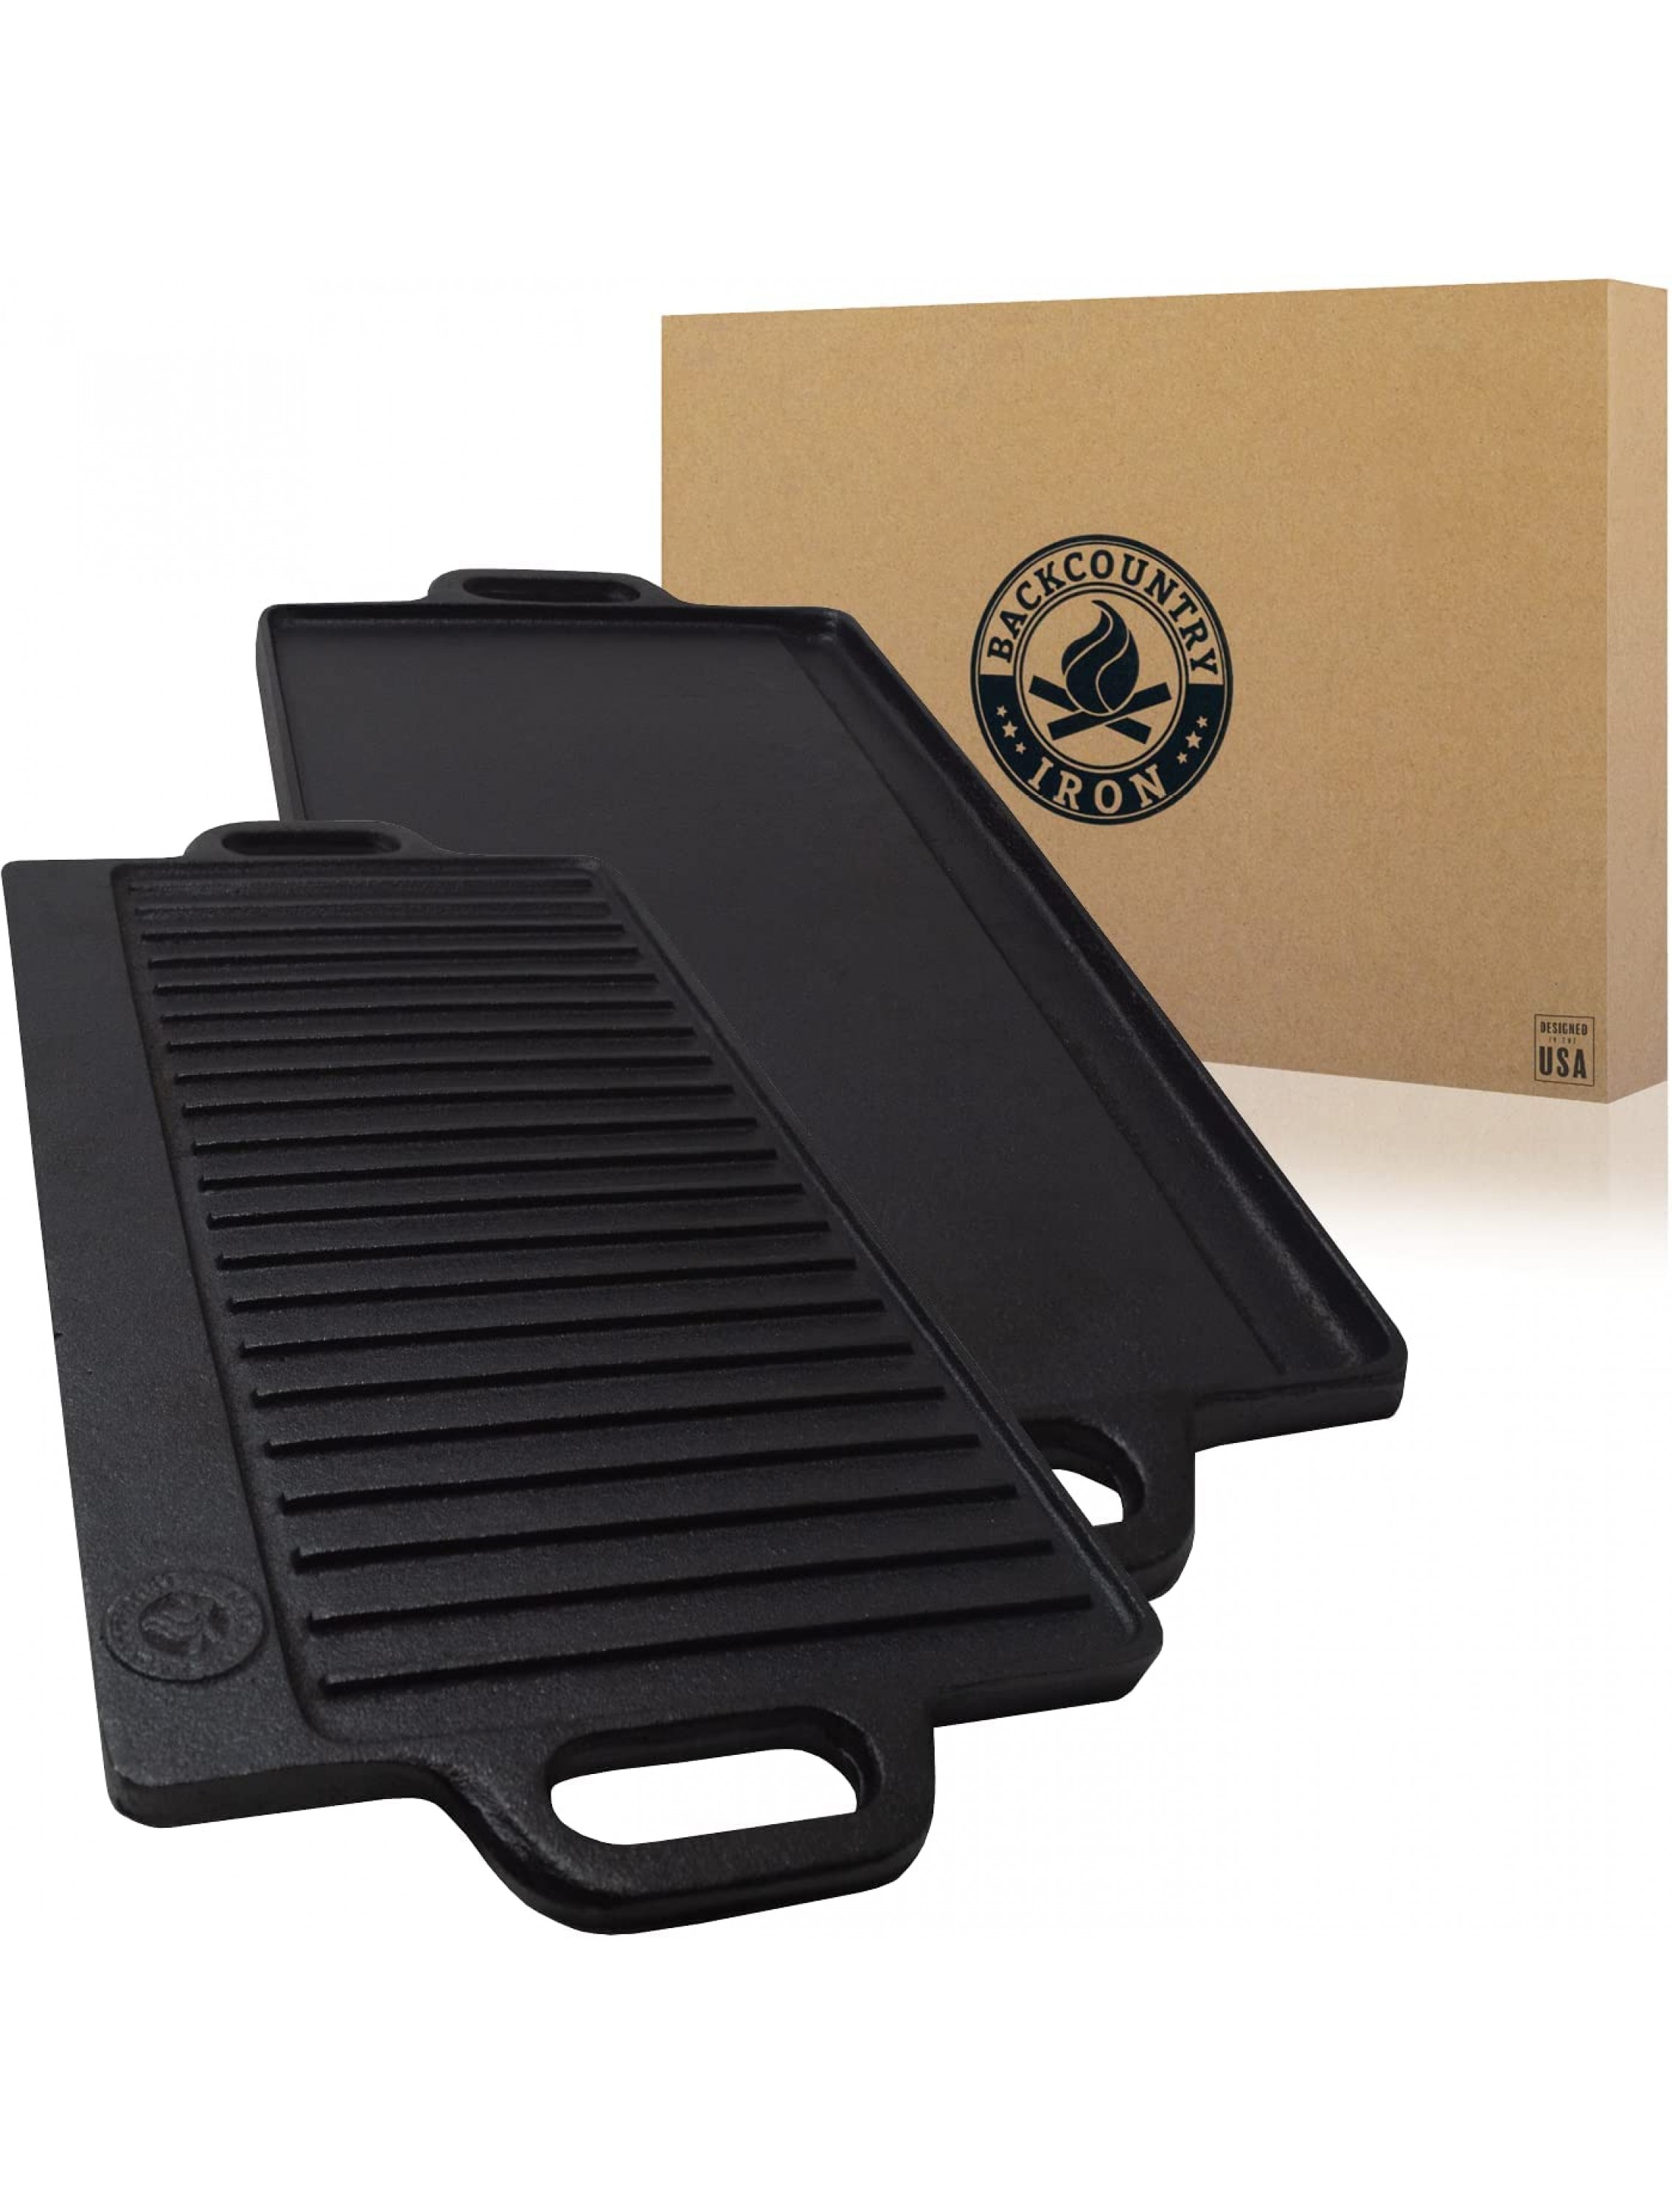 Backcountry Cast Iron Skillet 20x9 Large Reversible Grill Griddle Pre-Seasoned for Non-Stick Like Surface Cookware Oven Broiler Grill Safe Kitchen Deep Fryer Restaurant Chef Quality - BVWQL00CP